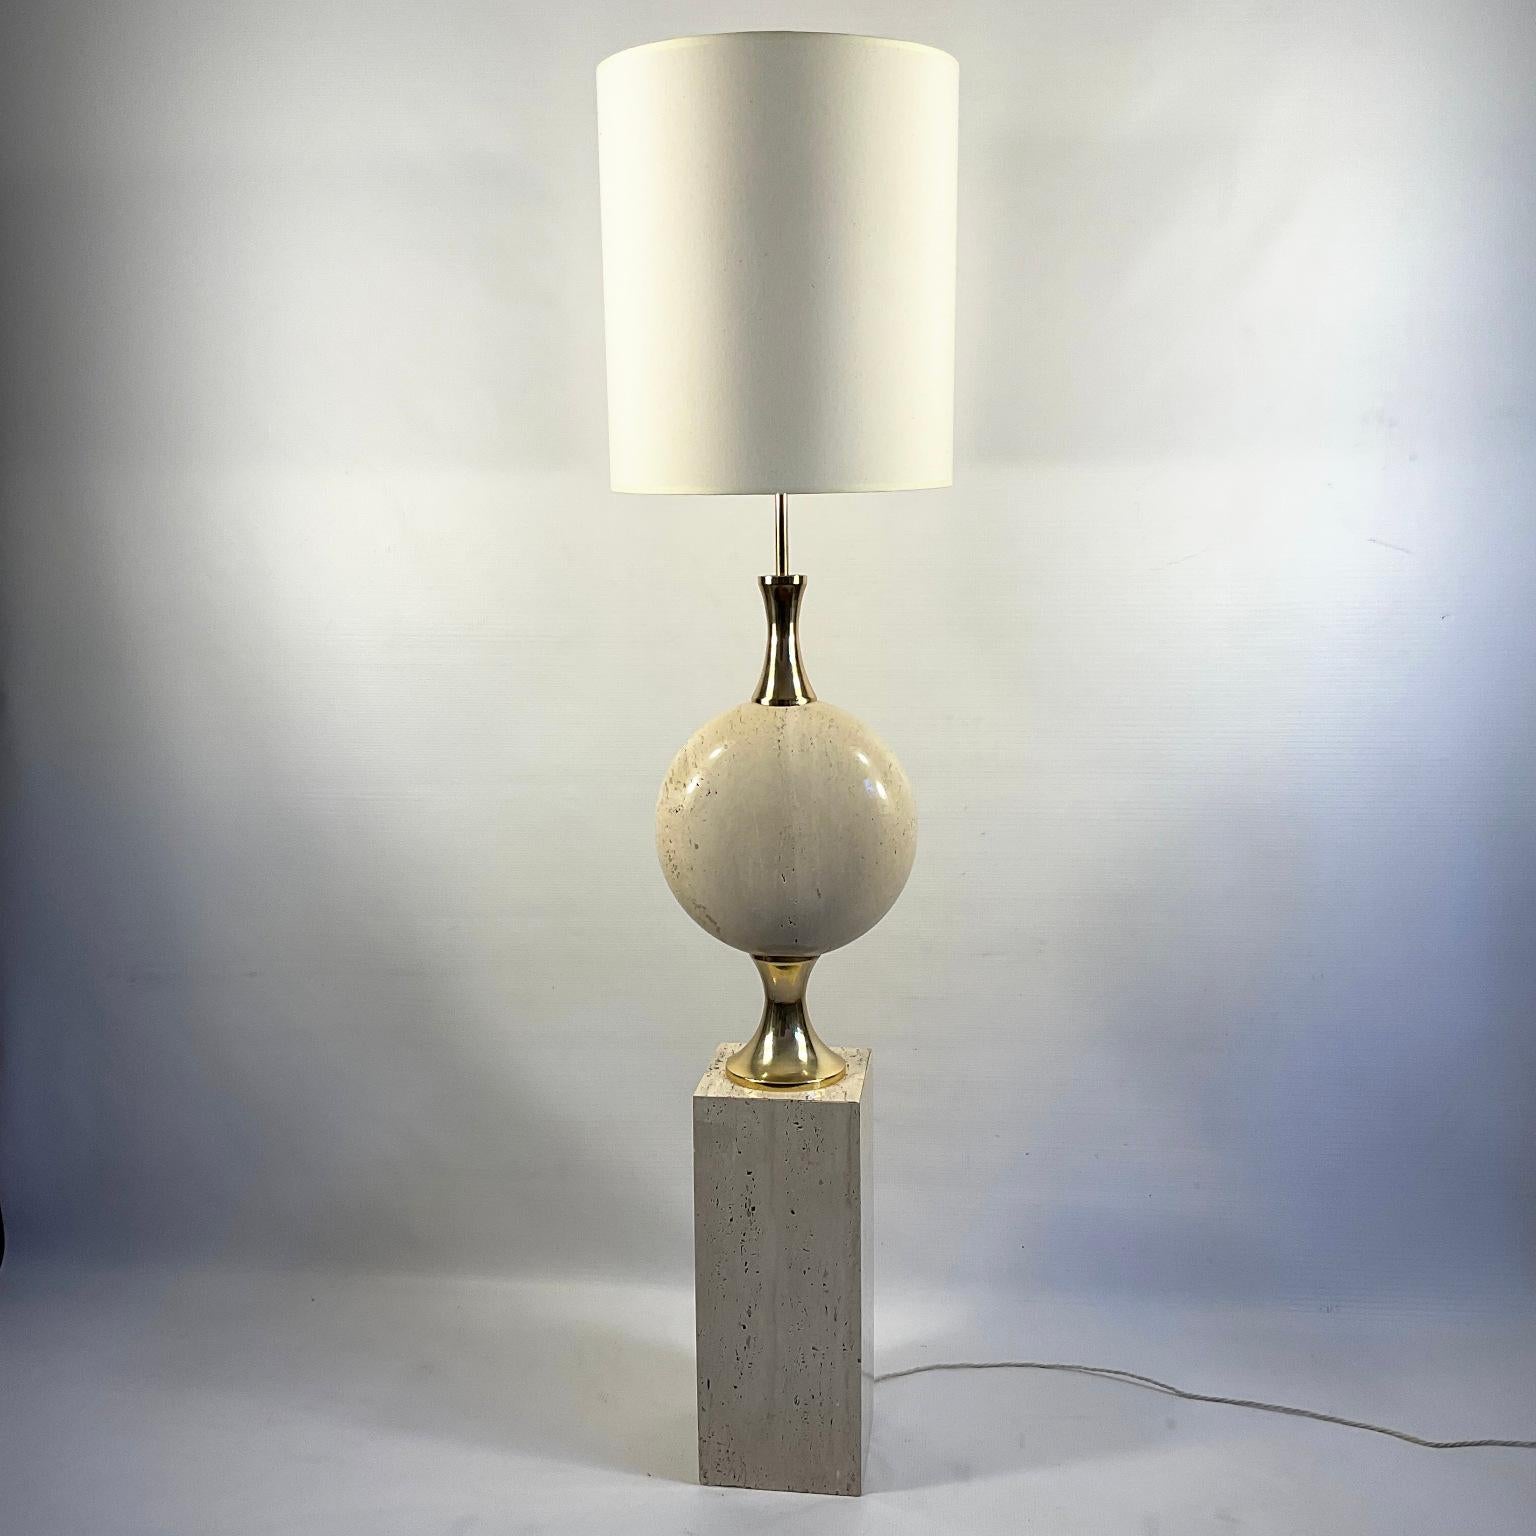 Carved 1970s Travertine Floor Lamp by Philippe Barbier for Maison Barbier Paris France For Sale